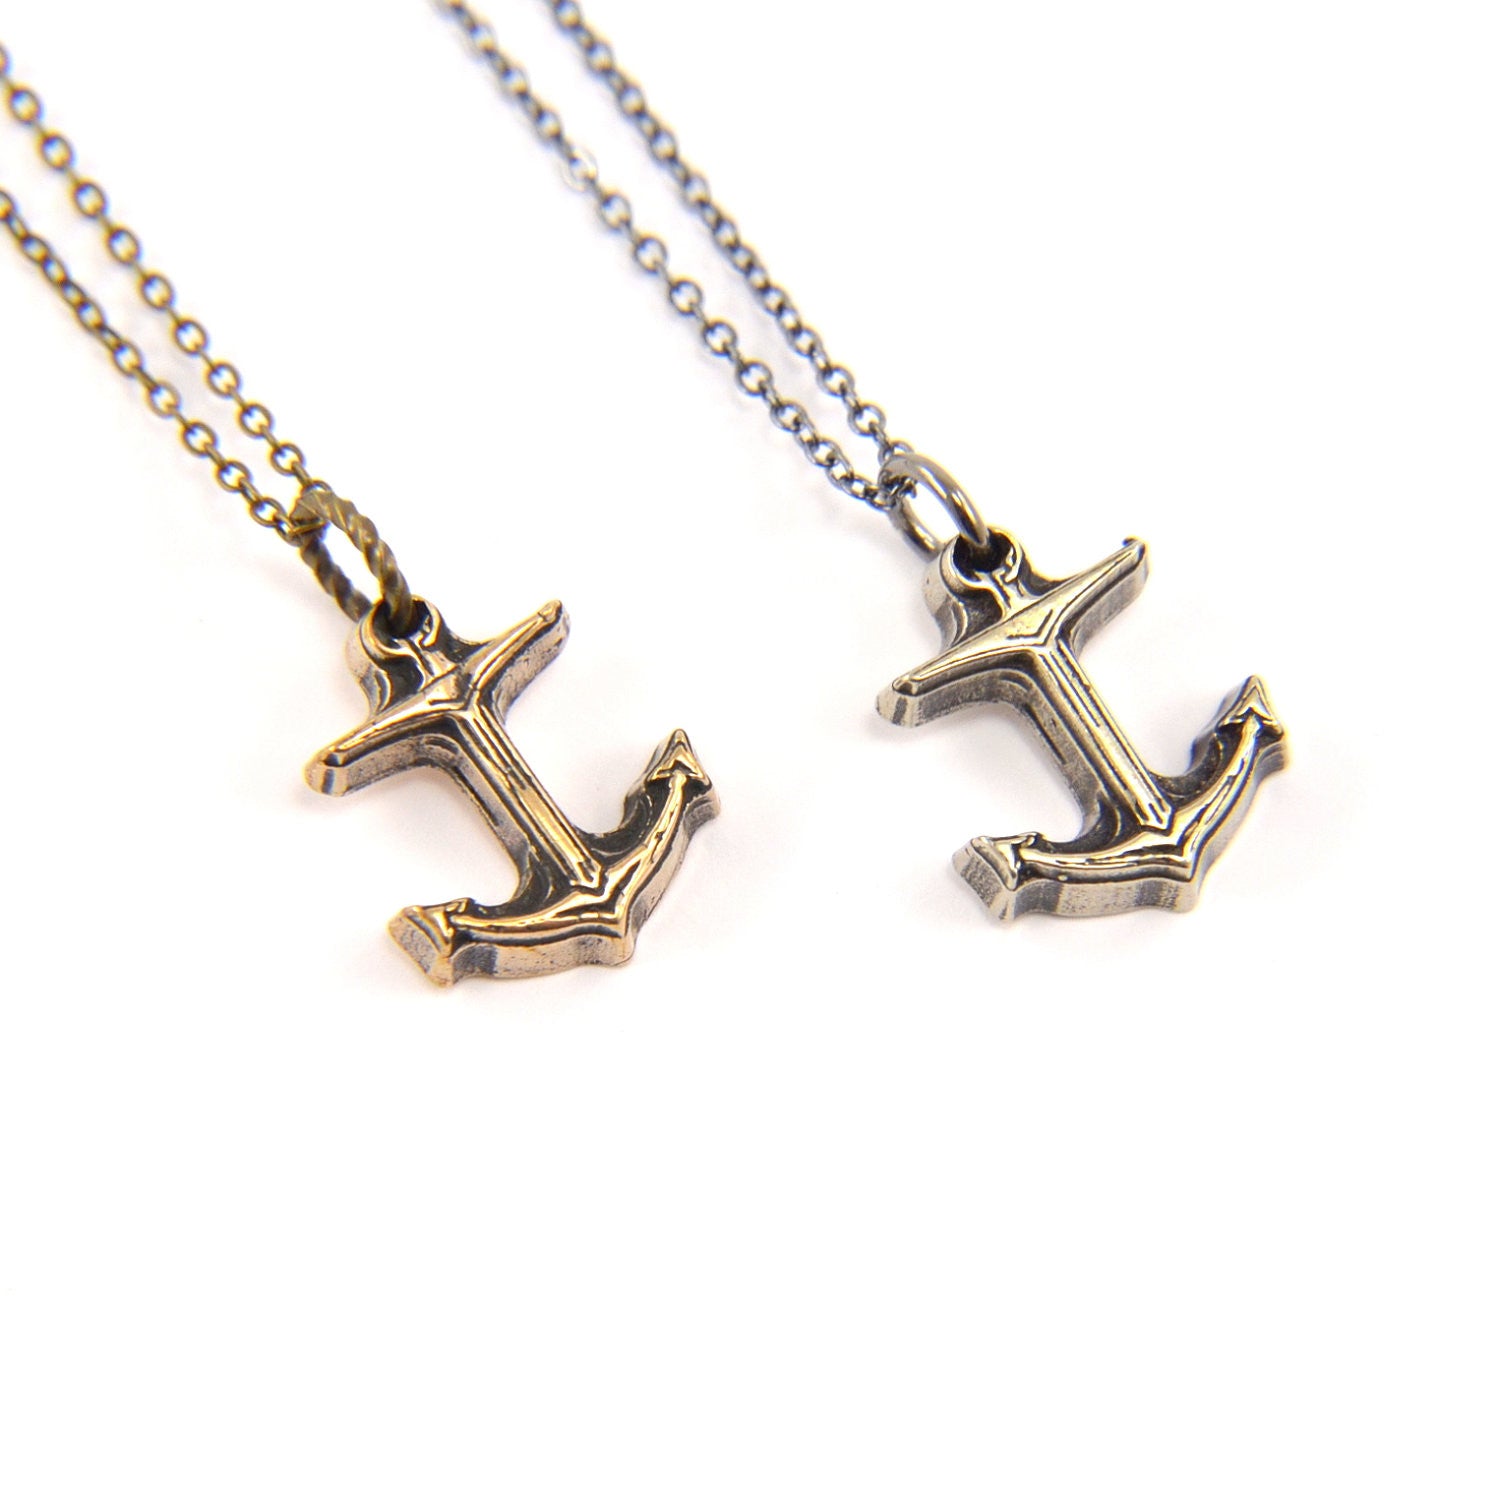 Tiny Anchor Necklace - Gwen Delicious Jewelry Designs